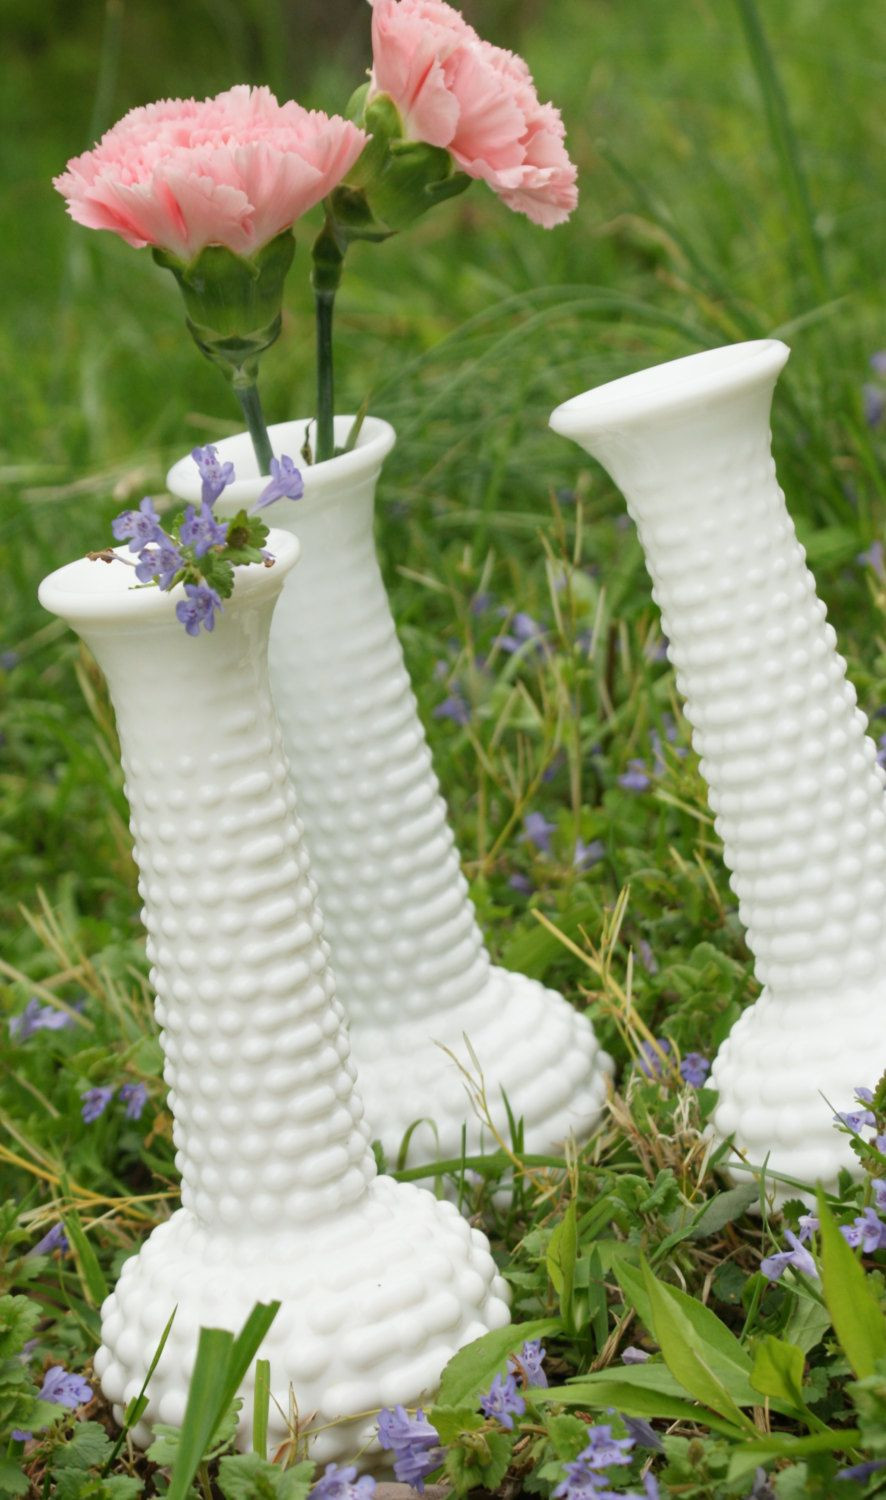 10 Popular Milk Vases for Centerpieces 2022 free download milk vases for centerpieces of vintage milk glass group bud vases white hobnail by daydreamingkat regarding vintage milk glass group bud vases white hobnail by daydreamingkat 17 95